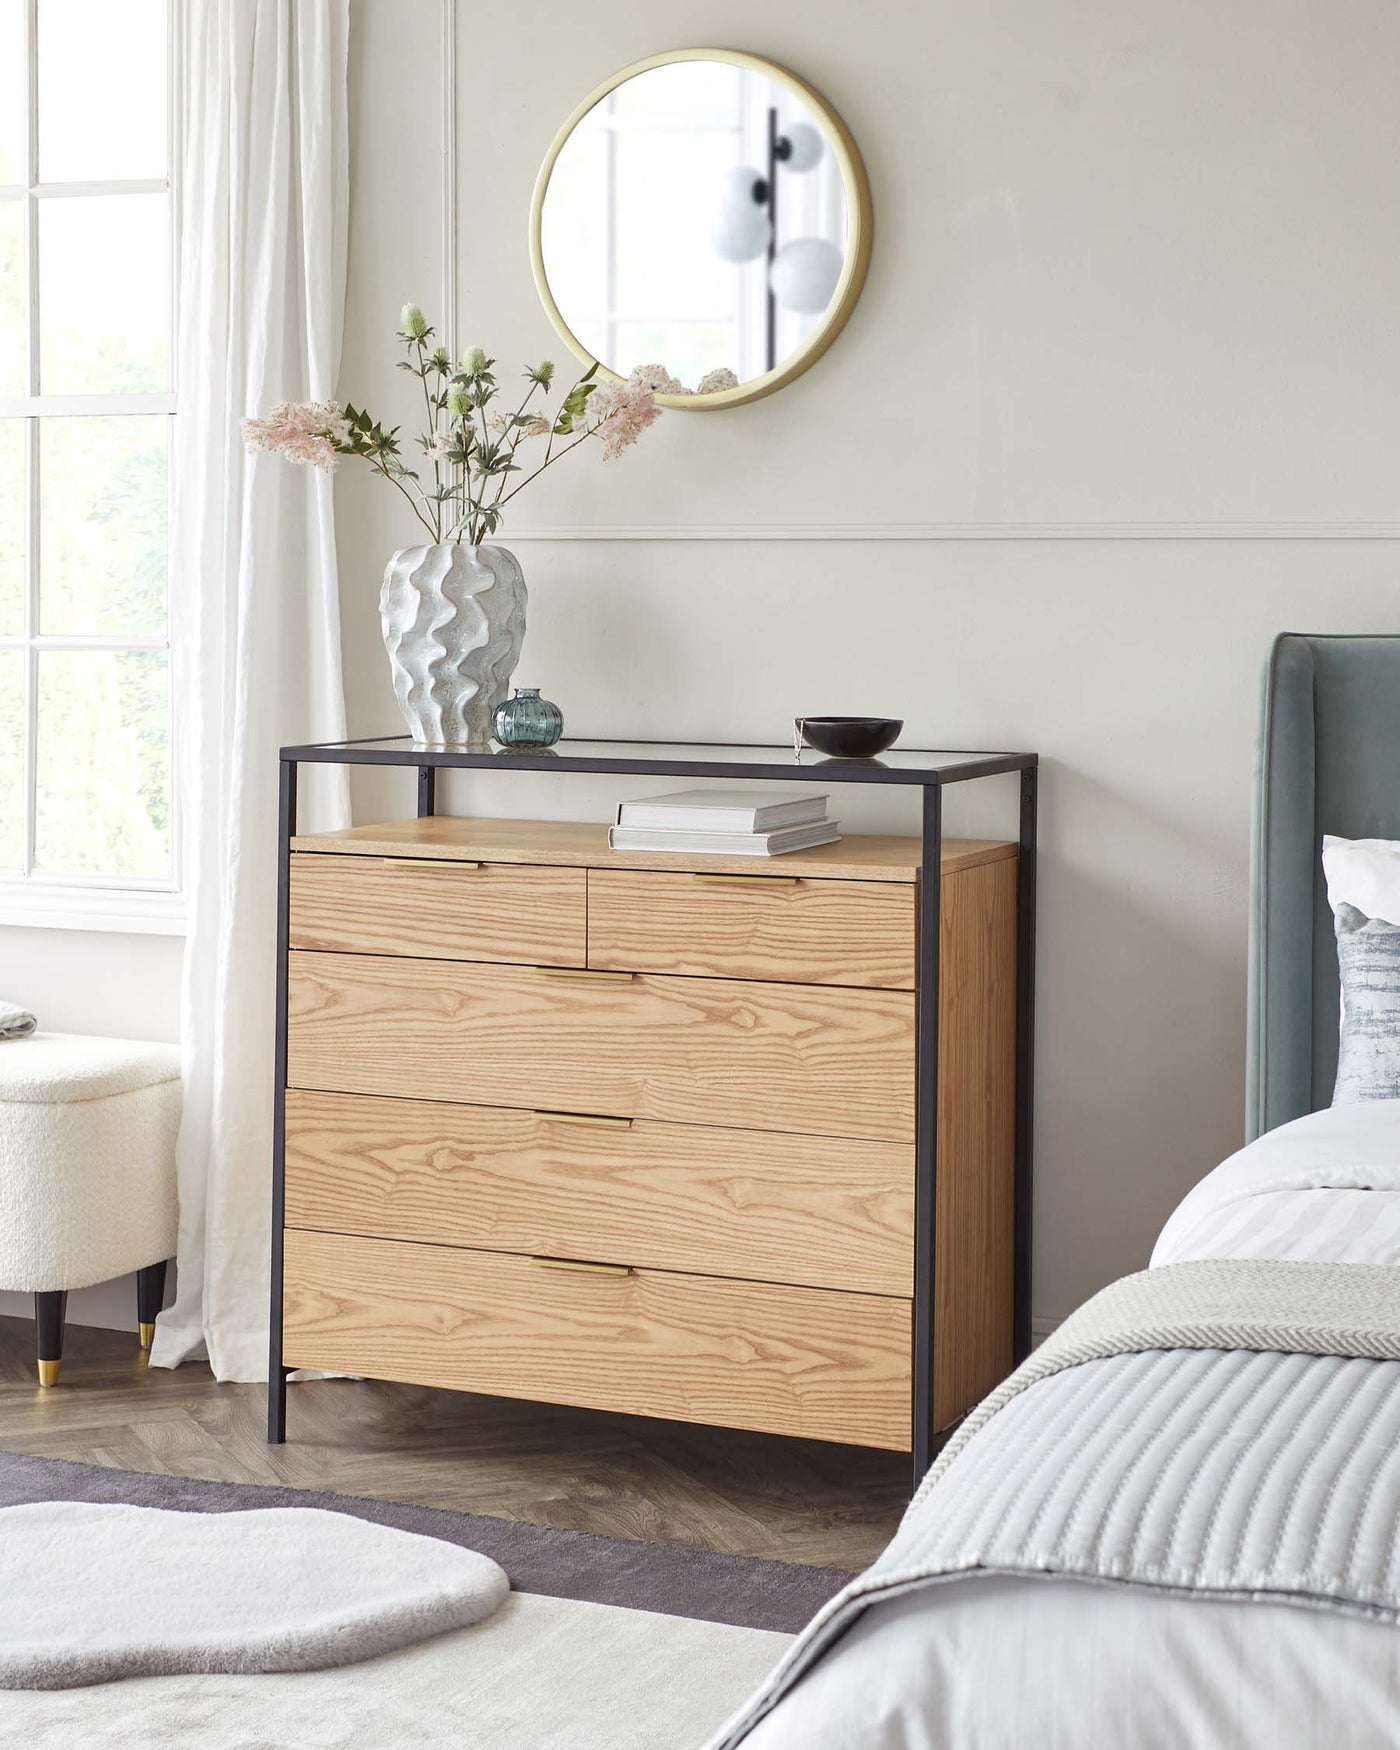 Modern light wood three-drawer dresser with sleek profile, black metal frame accents, and minimalist handles, partnered with a dark metal and glass console table displaying decorative items, set against a bright bedroom backdrop with neutral tones.